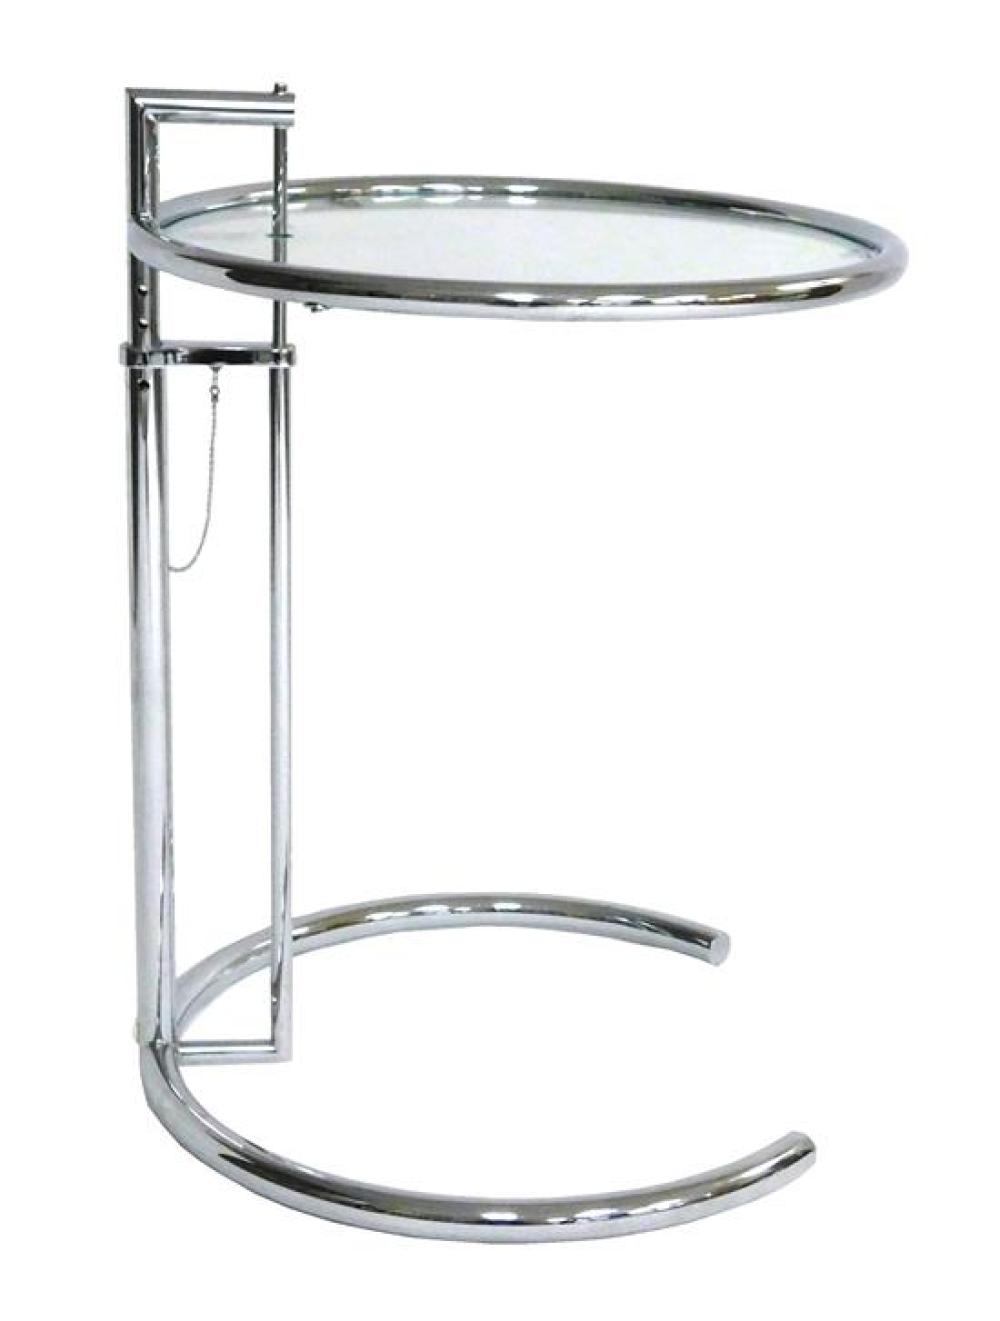 EILEEN GRAY ADJUSTABLE GLASS AND